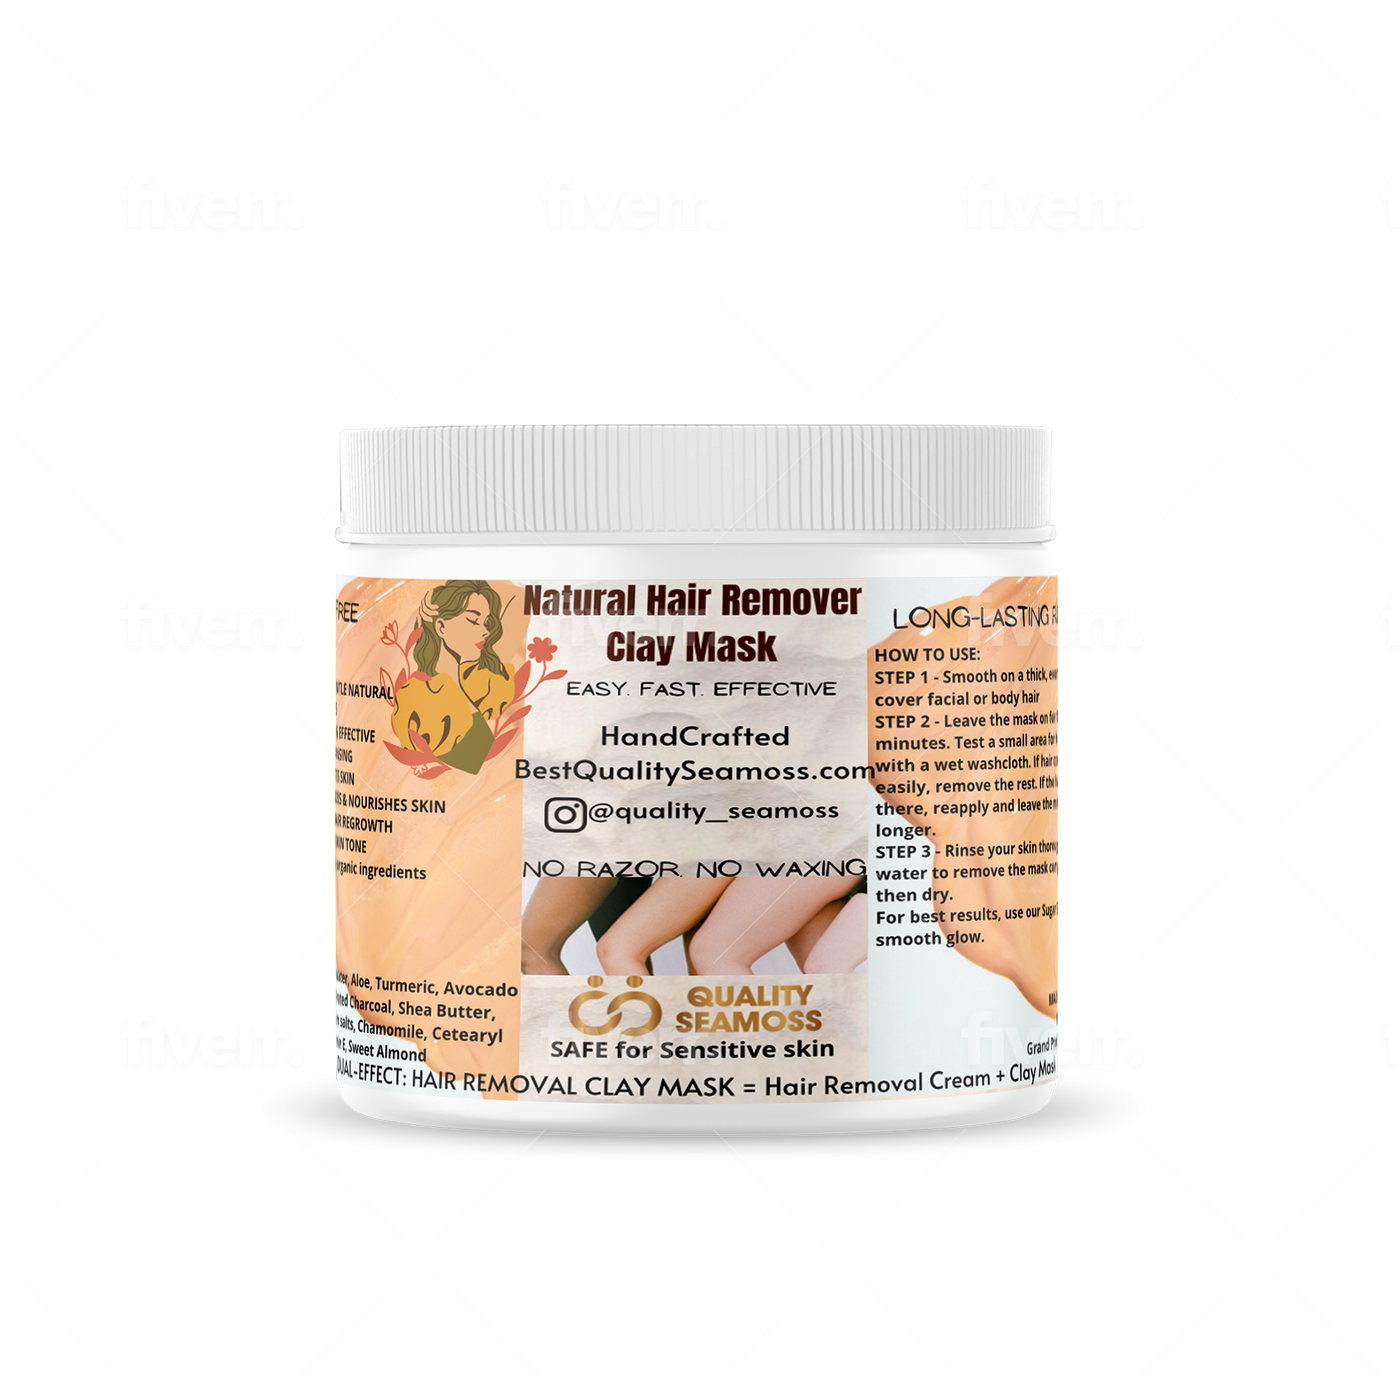 Hair Removal Mask Charcoal and Turmeric